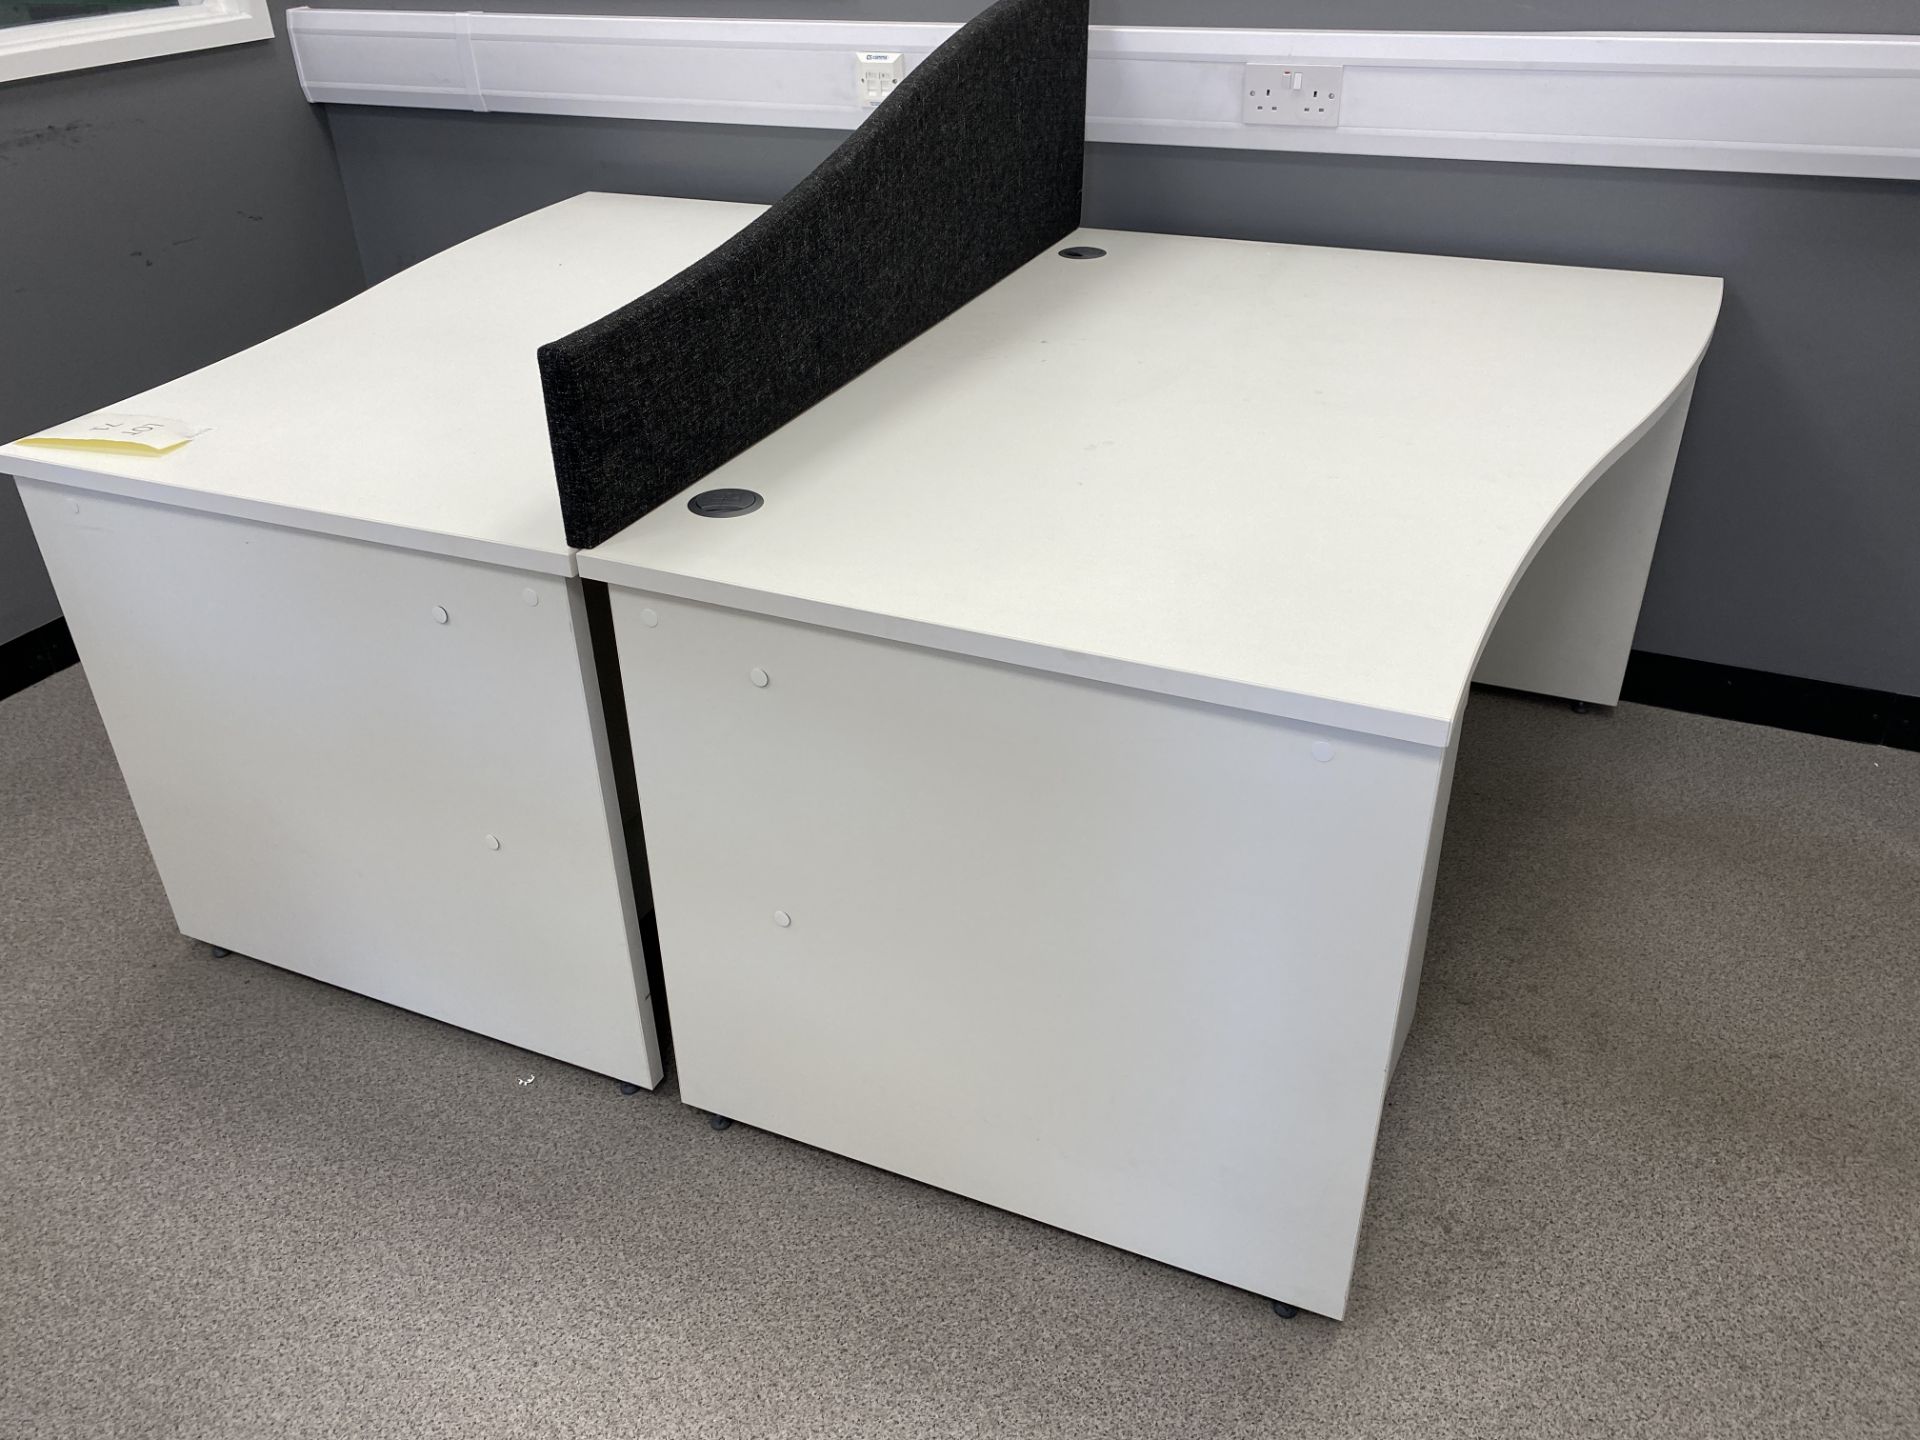 2: White Melomine Wave Desks with Pedestals Sixe - 1.4m (wave- 0.8m) X 1m - Image 2 of 7